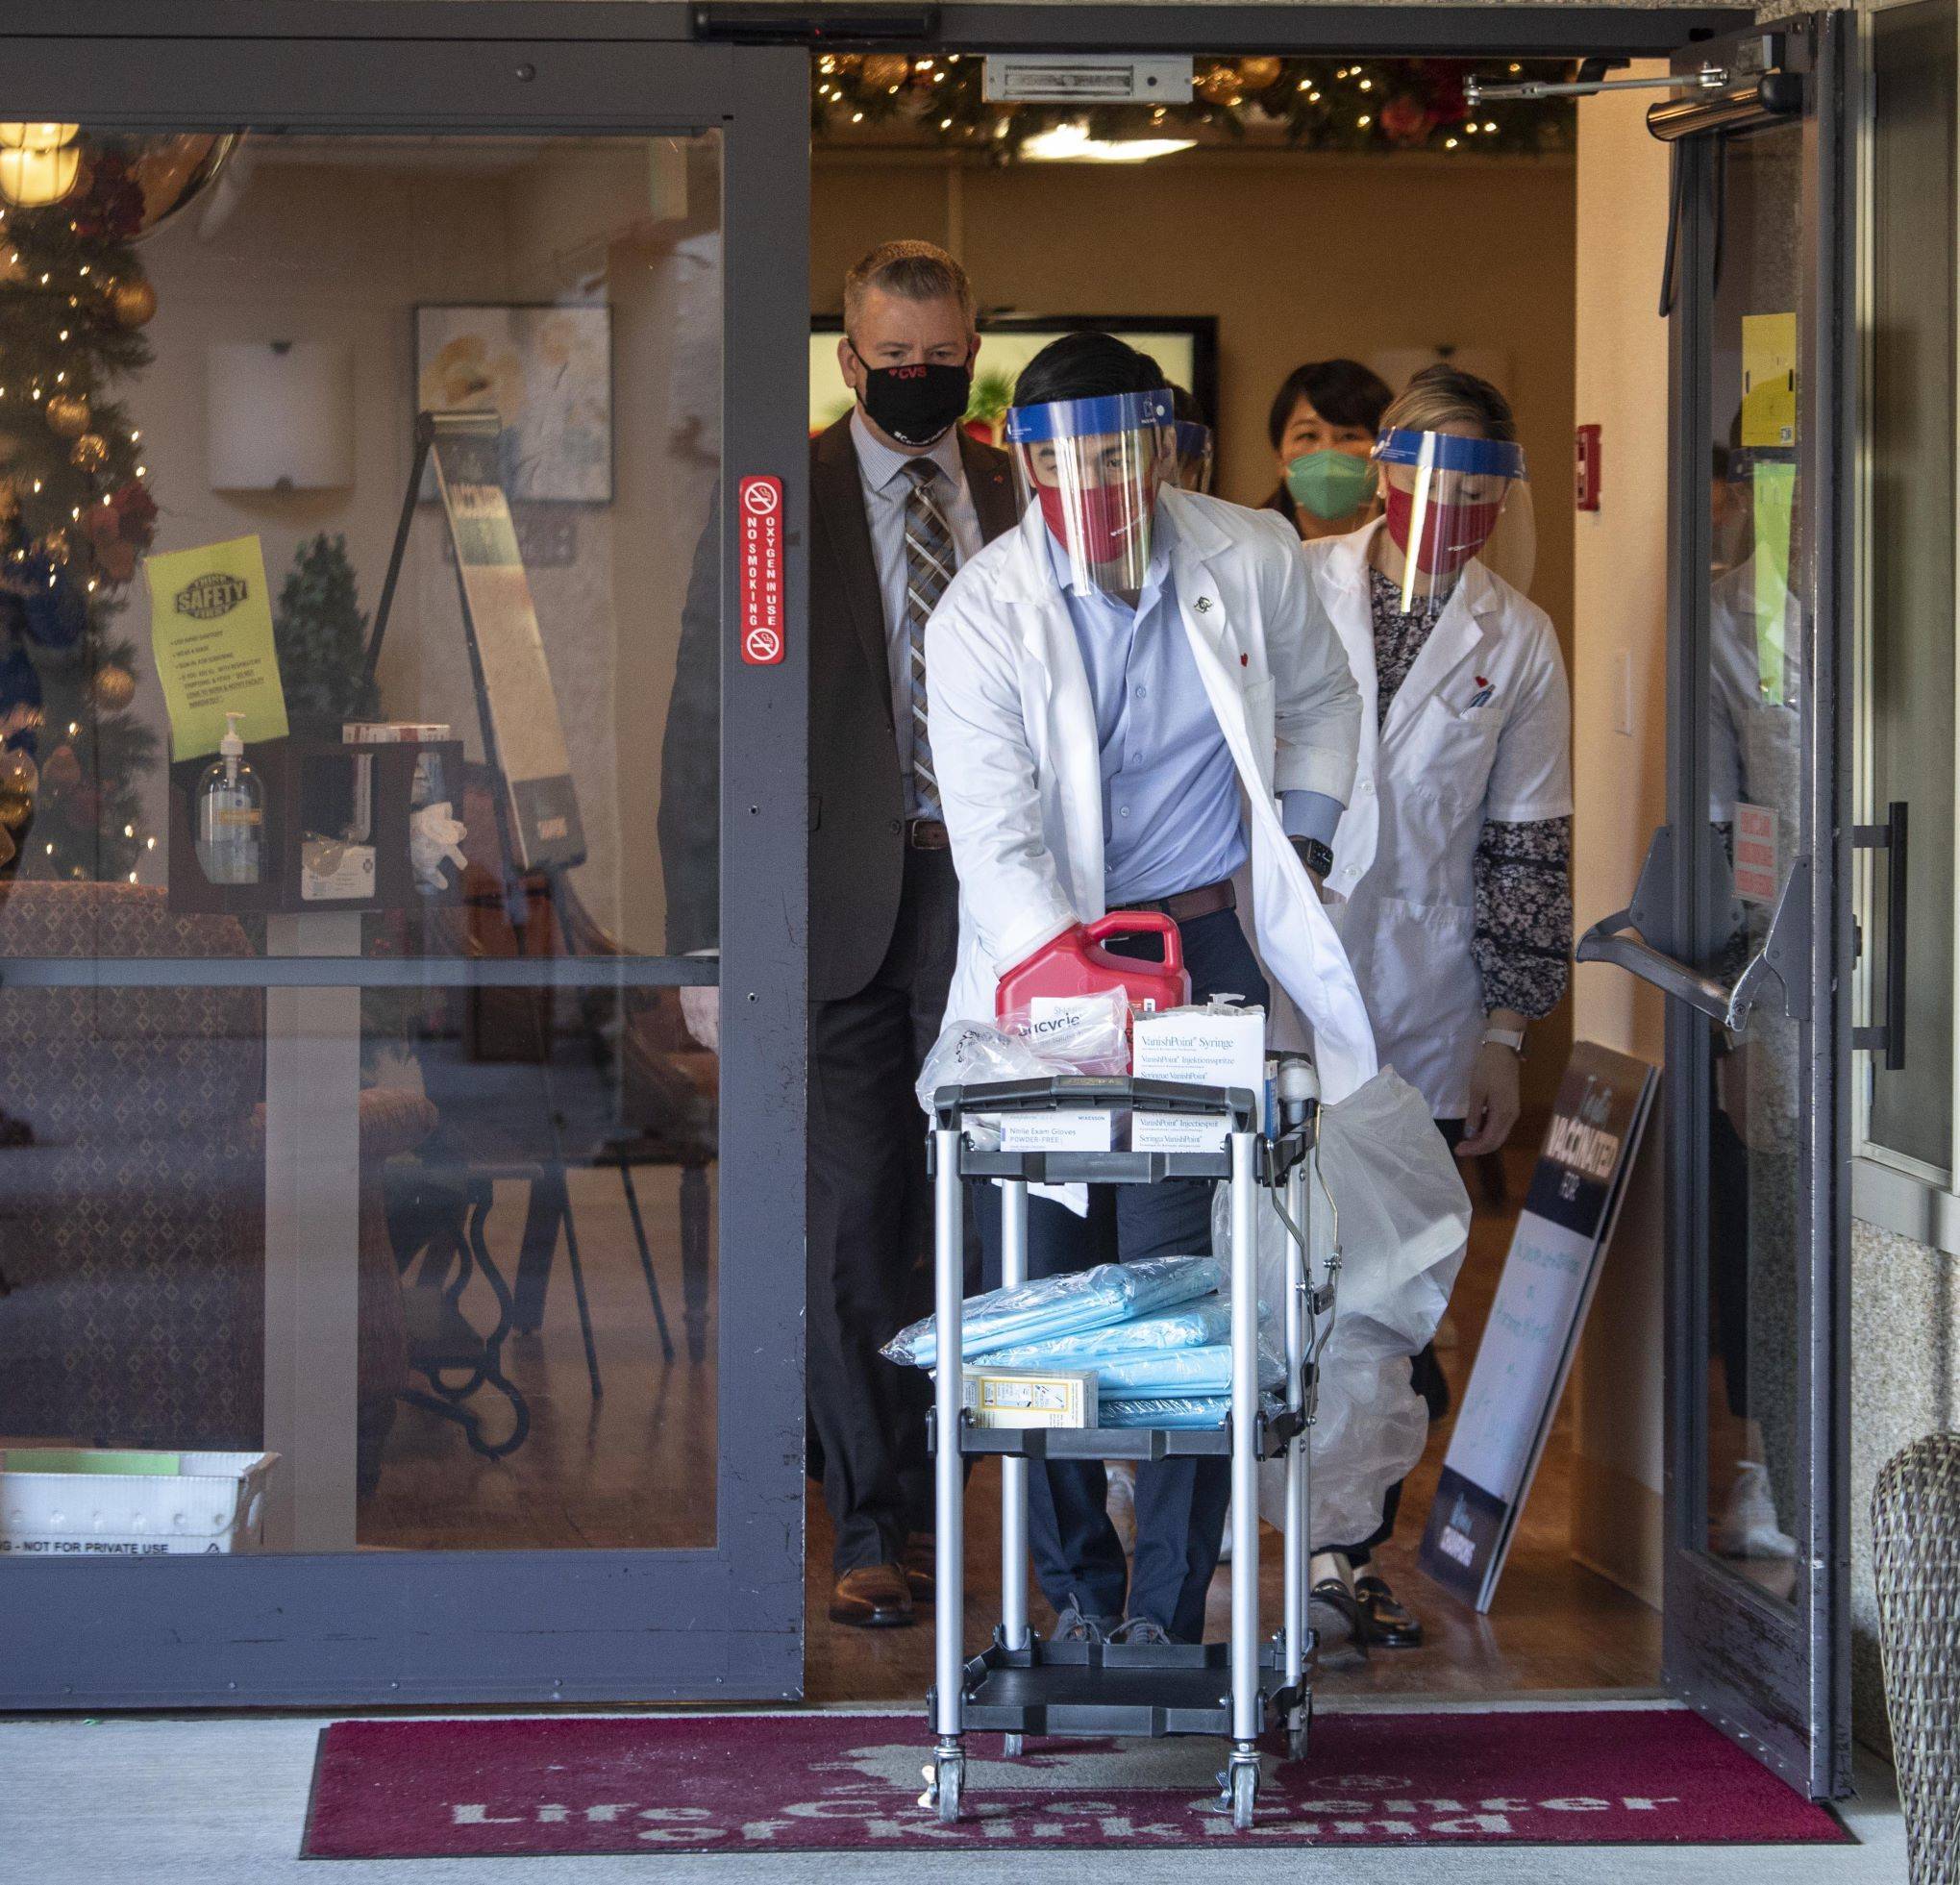 Steve Ringman / Seattle Times
Matt Talavera, a pharmacist for CVS, wheels a cart out of the Life Care Center in Kirkland, where he started giving the vaccine to employees of the Center on Monday.